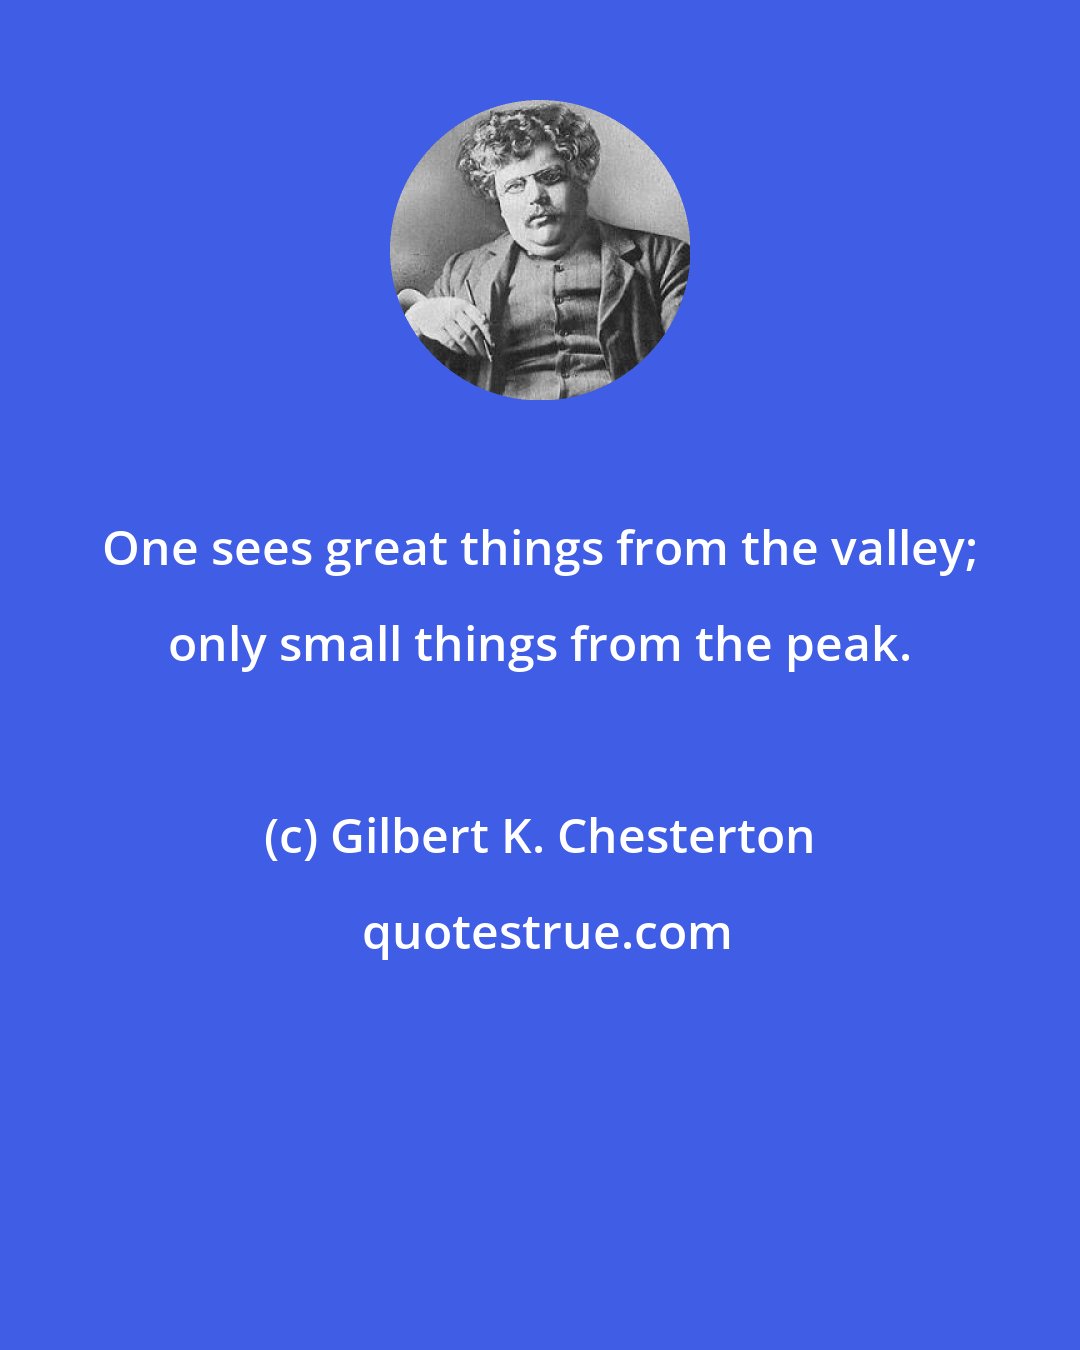 Gilbert K. Chesterton: One sees great things from the valley; only small things from the peak.